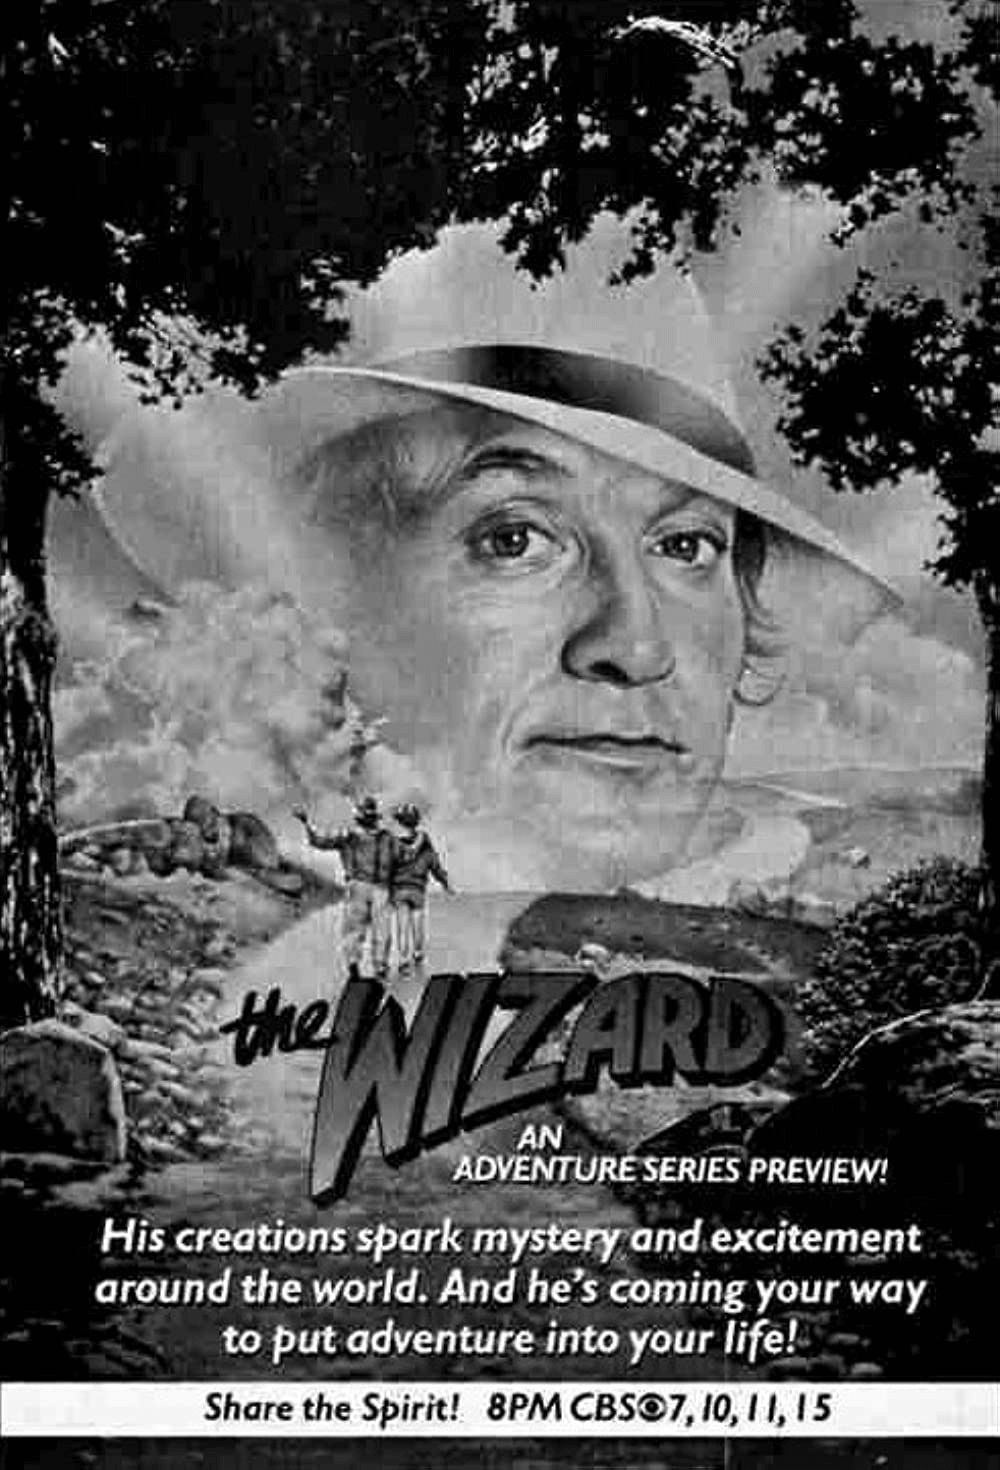 The Wizard, 1986